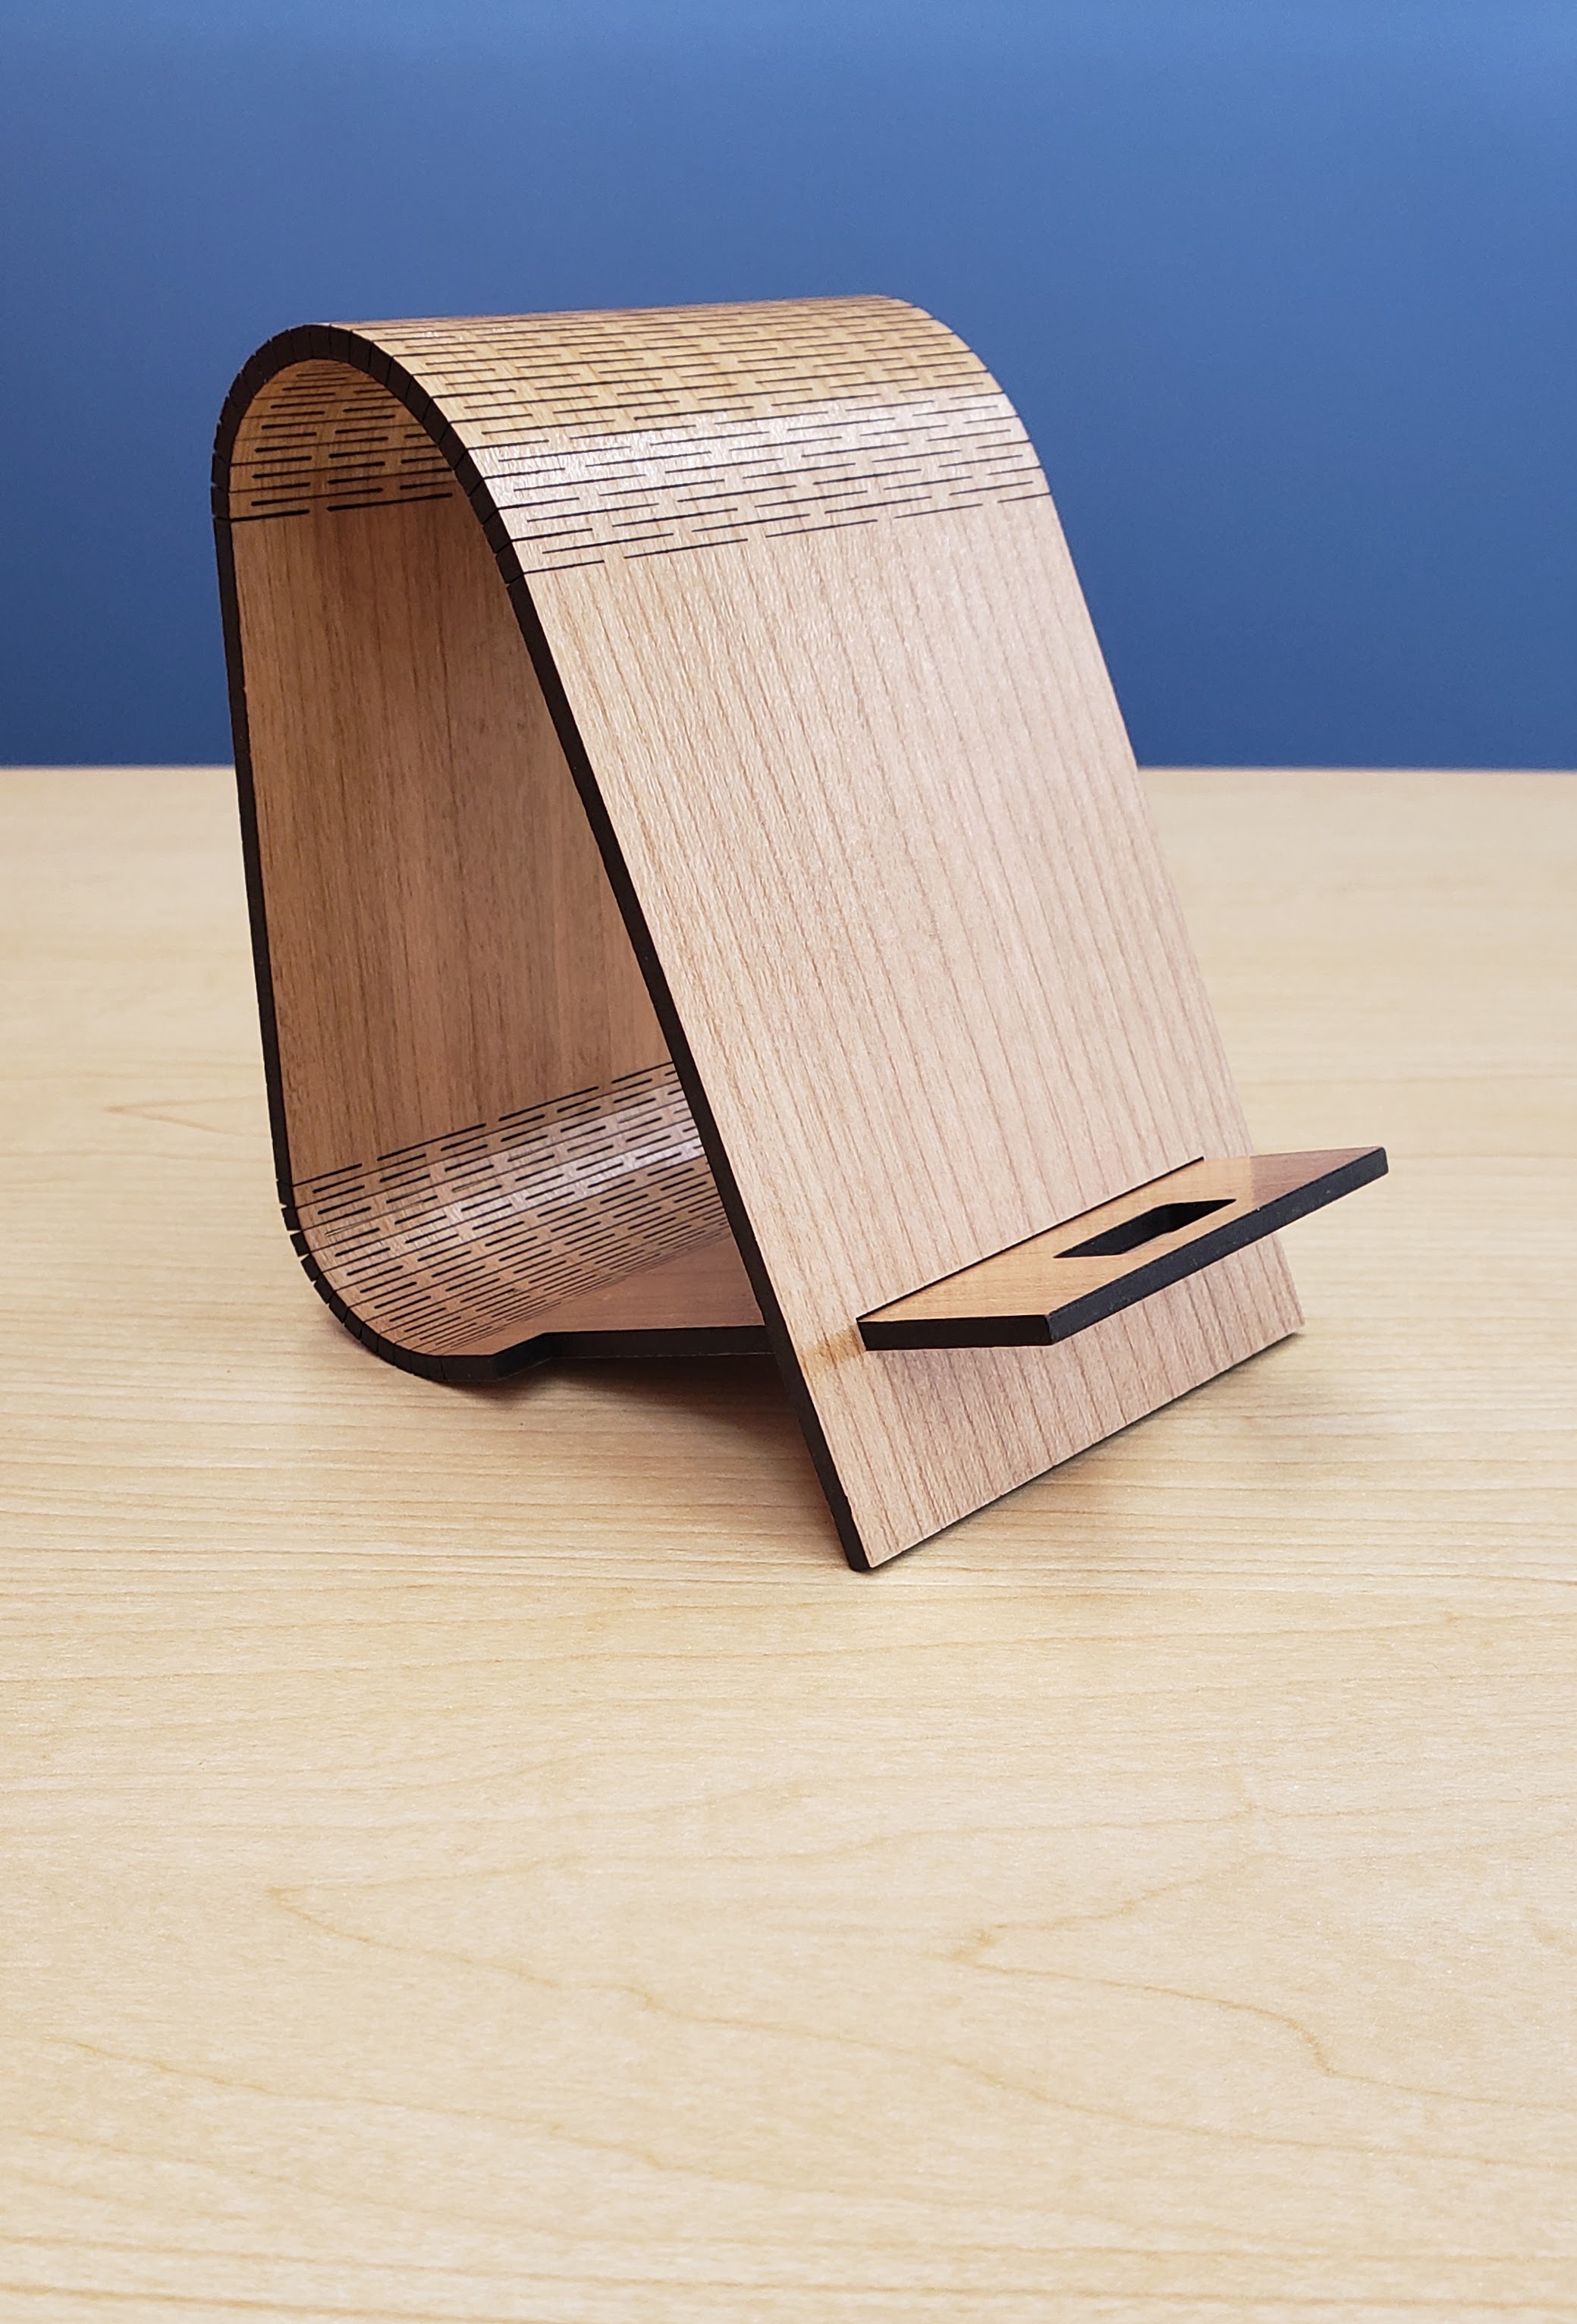 wooden laser cut cell phone holder shown on a table